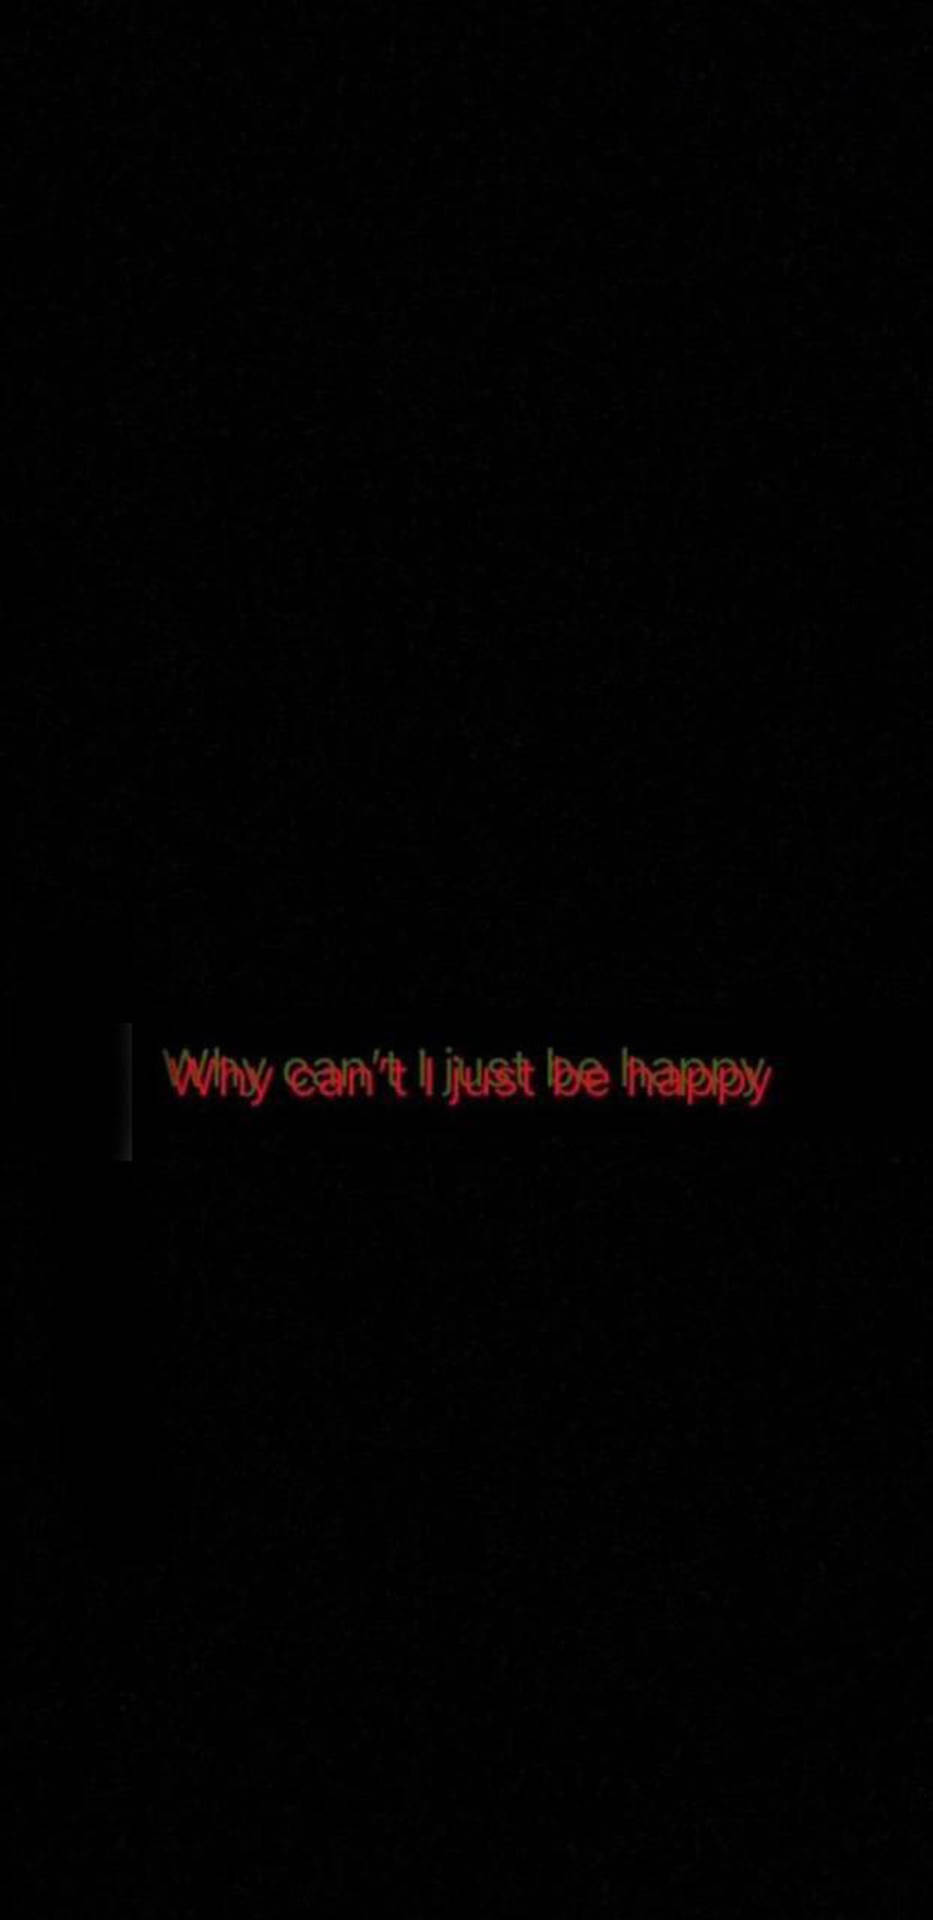 Why Can't I Just Be Happy Wallpaper